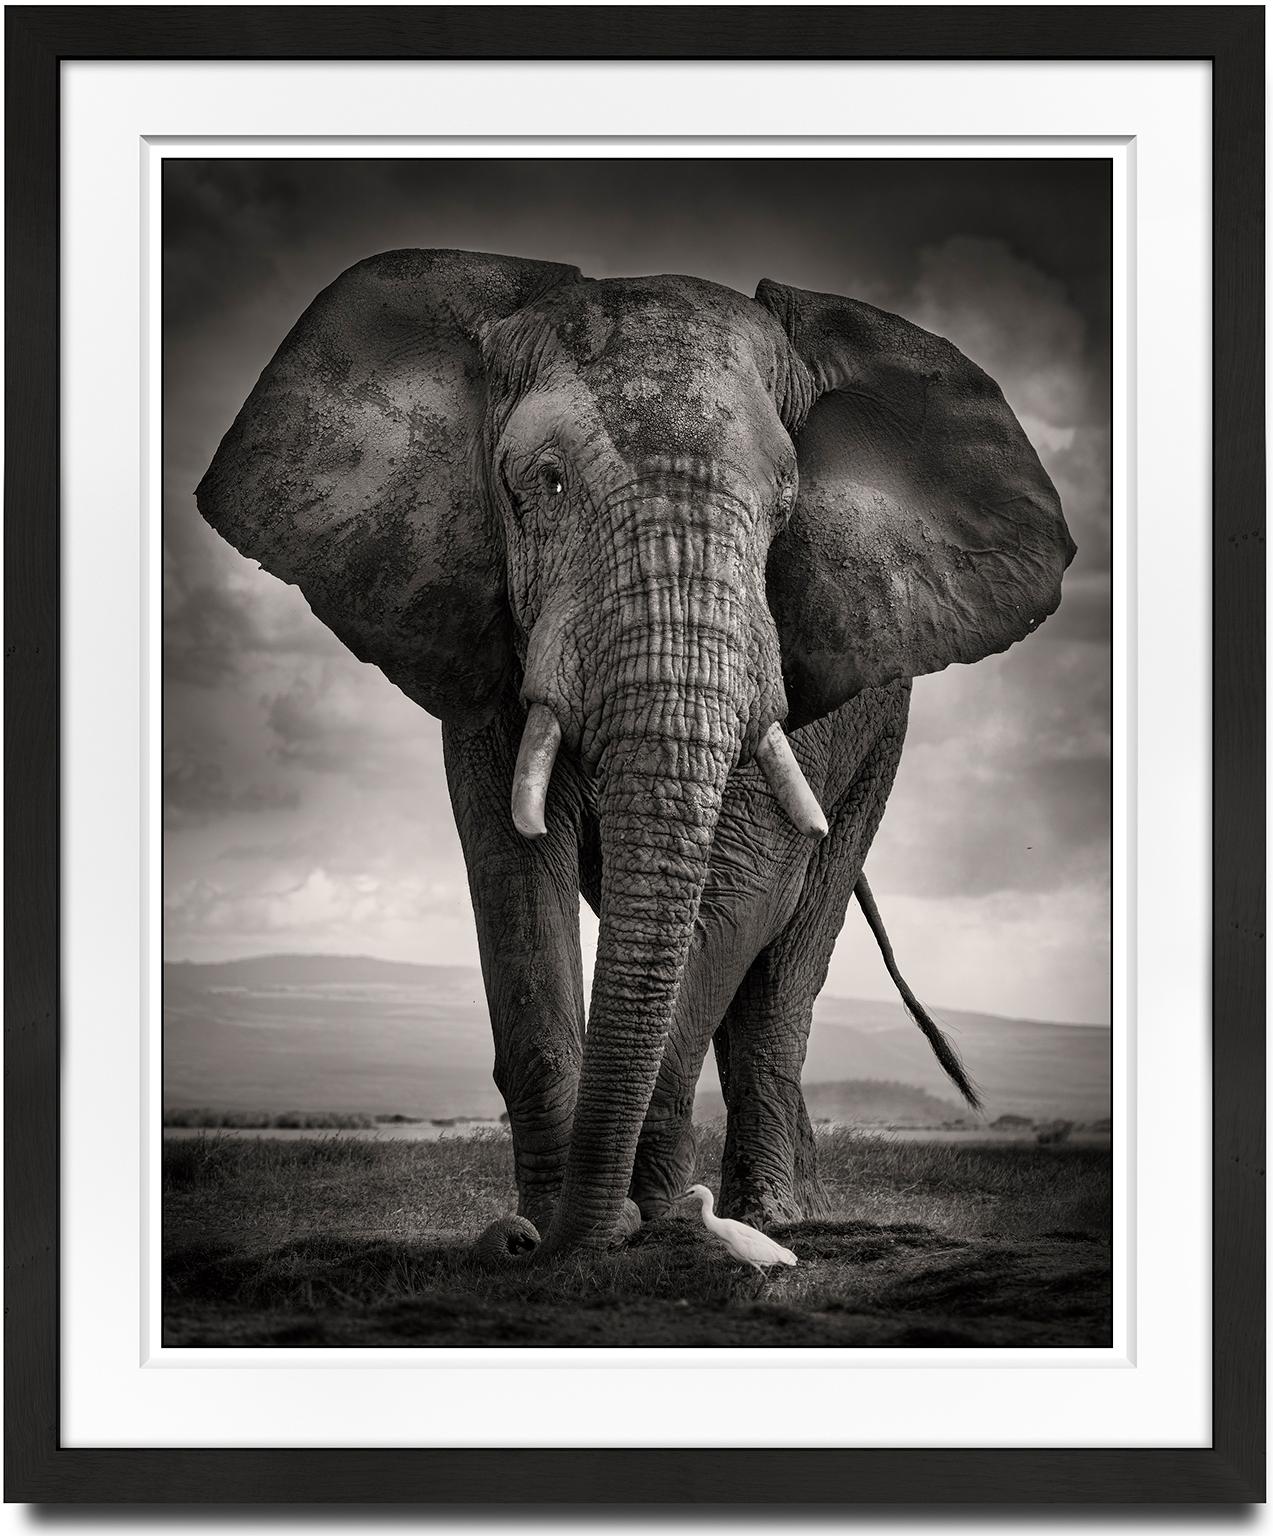 The Bull and the Bird III, animal, elephant, black and white photography - Photograph by Joachim Schmeisser